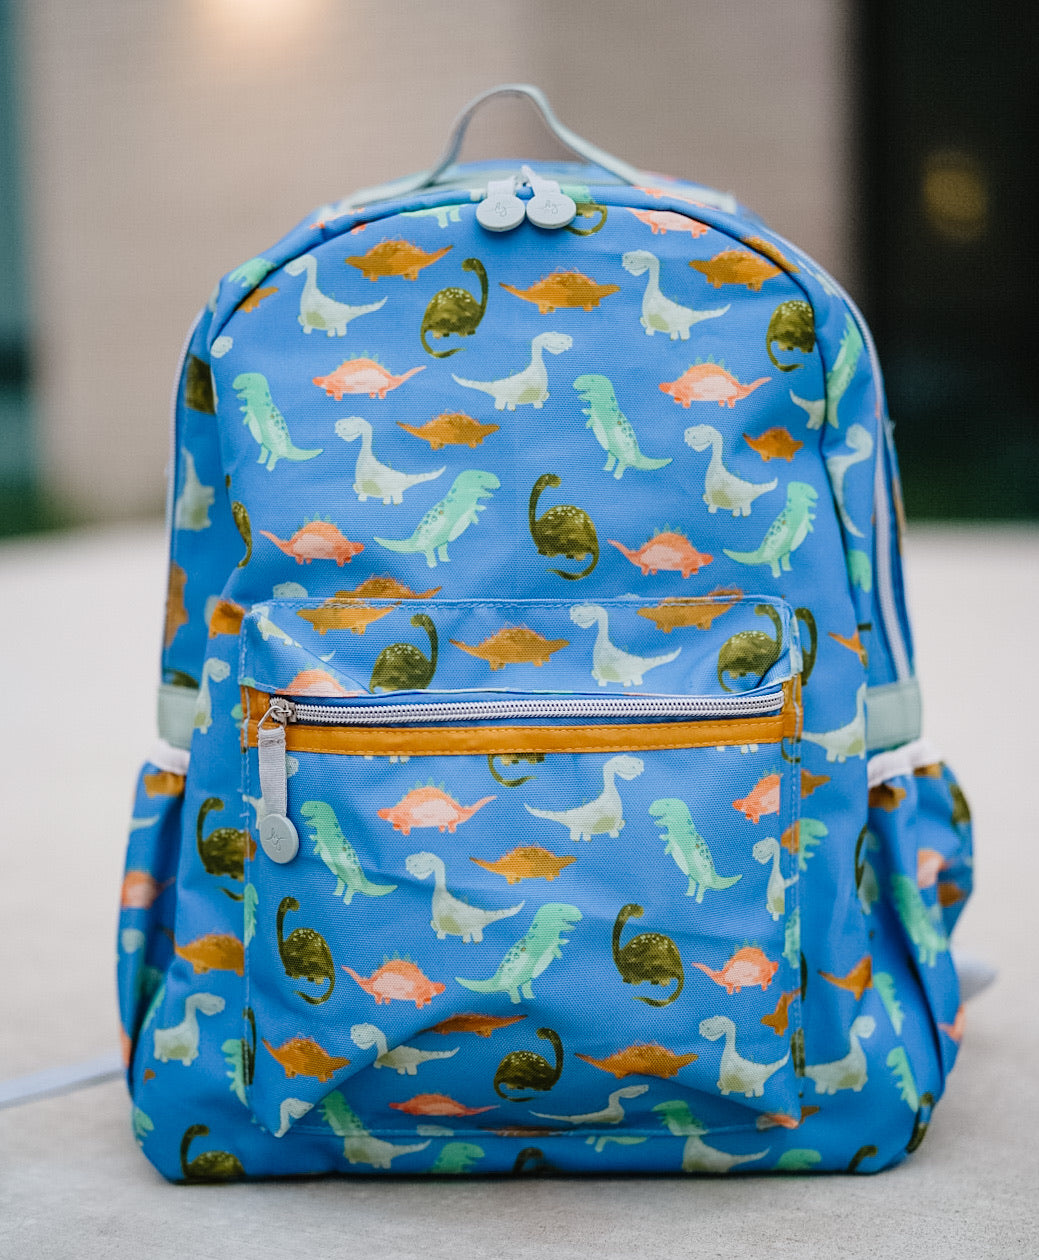 The Dino Backpack – Cash and Company